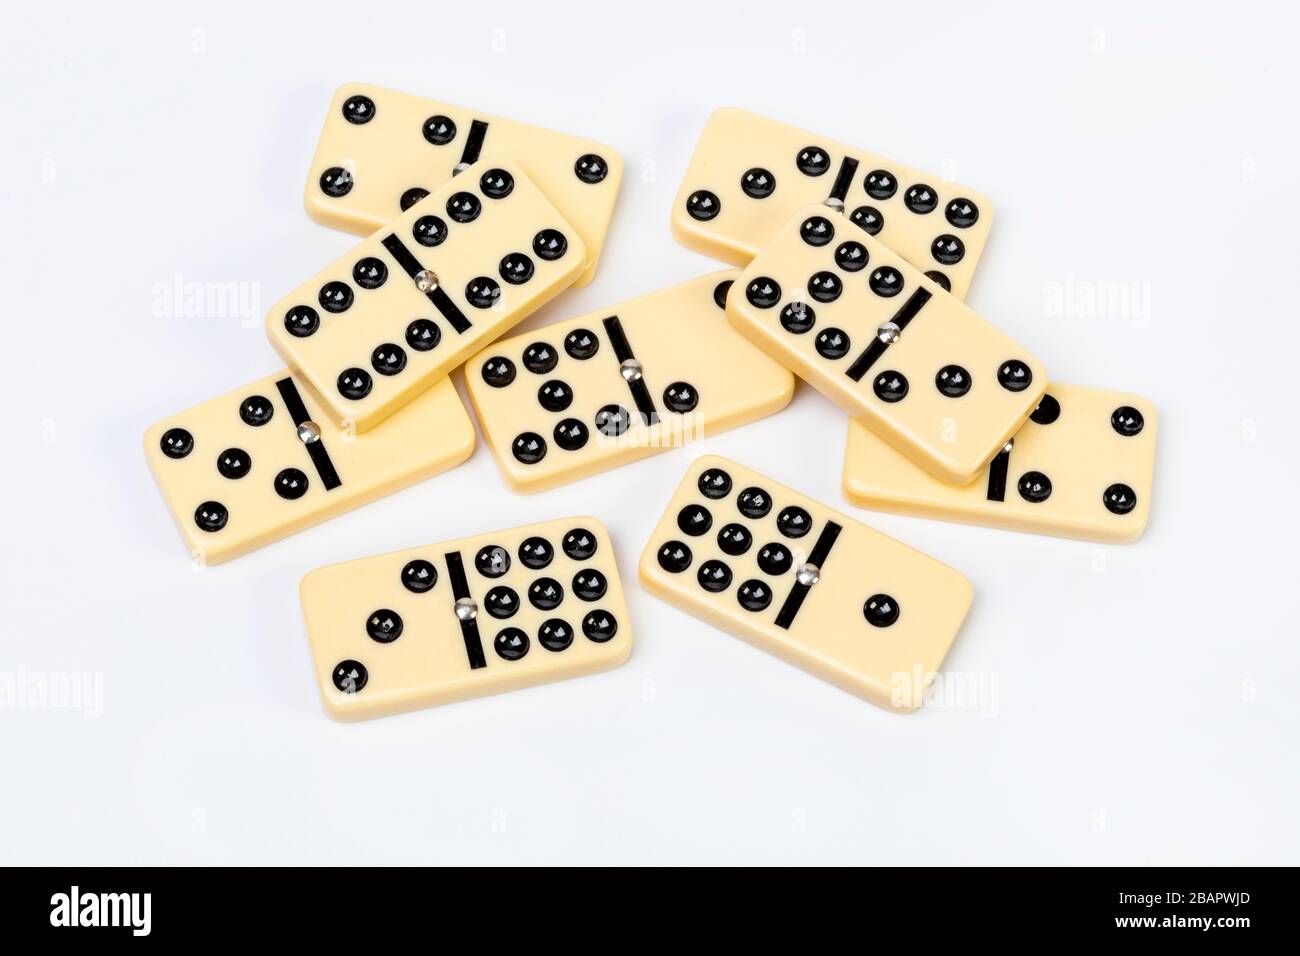 A group of double nine dominoes Stock Photo